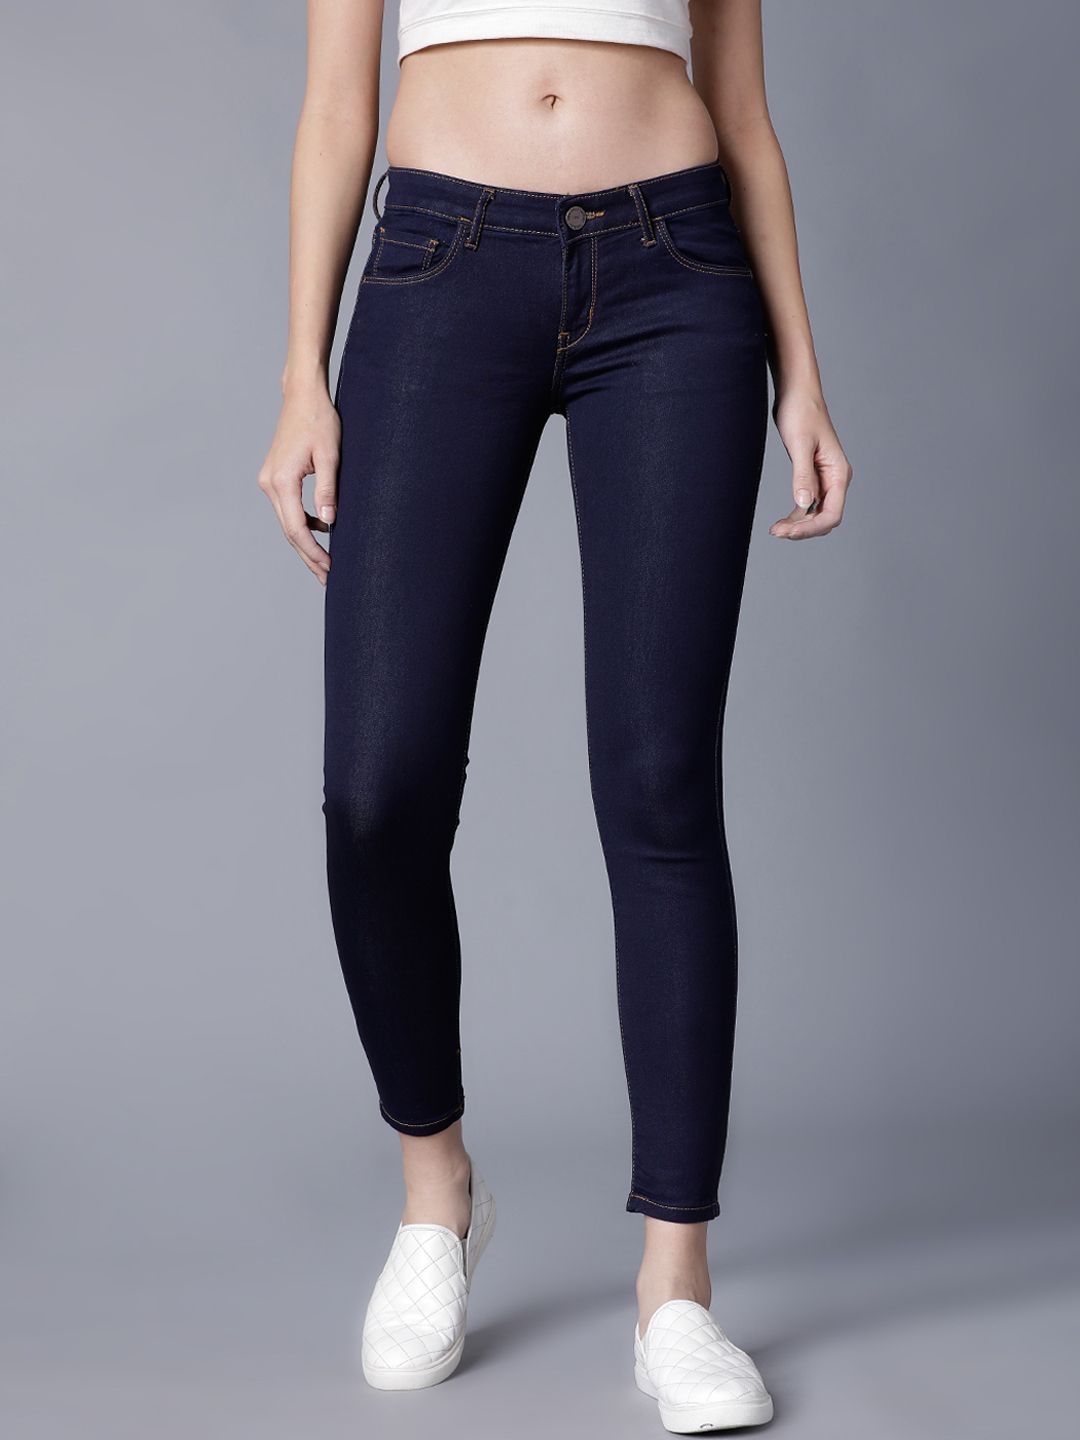 Tokyo Talkies Women Navy Blue Super Skinny Fit Mid-Rise Clean Look Stretchable Jeans Price in India